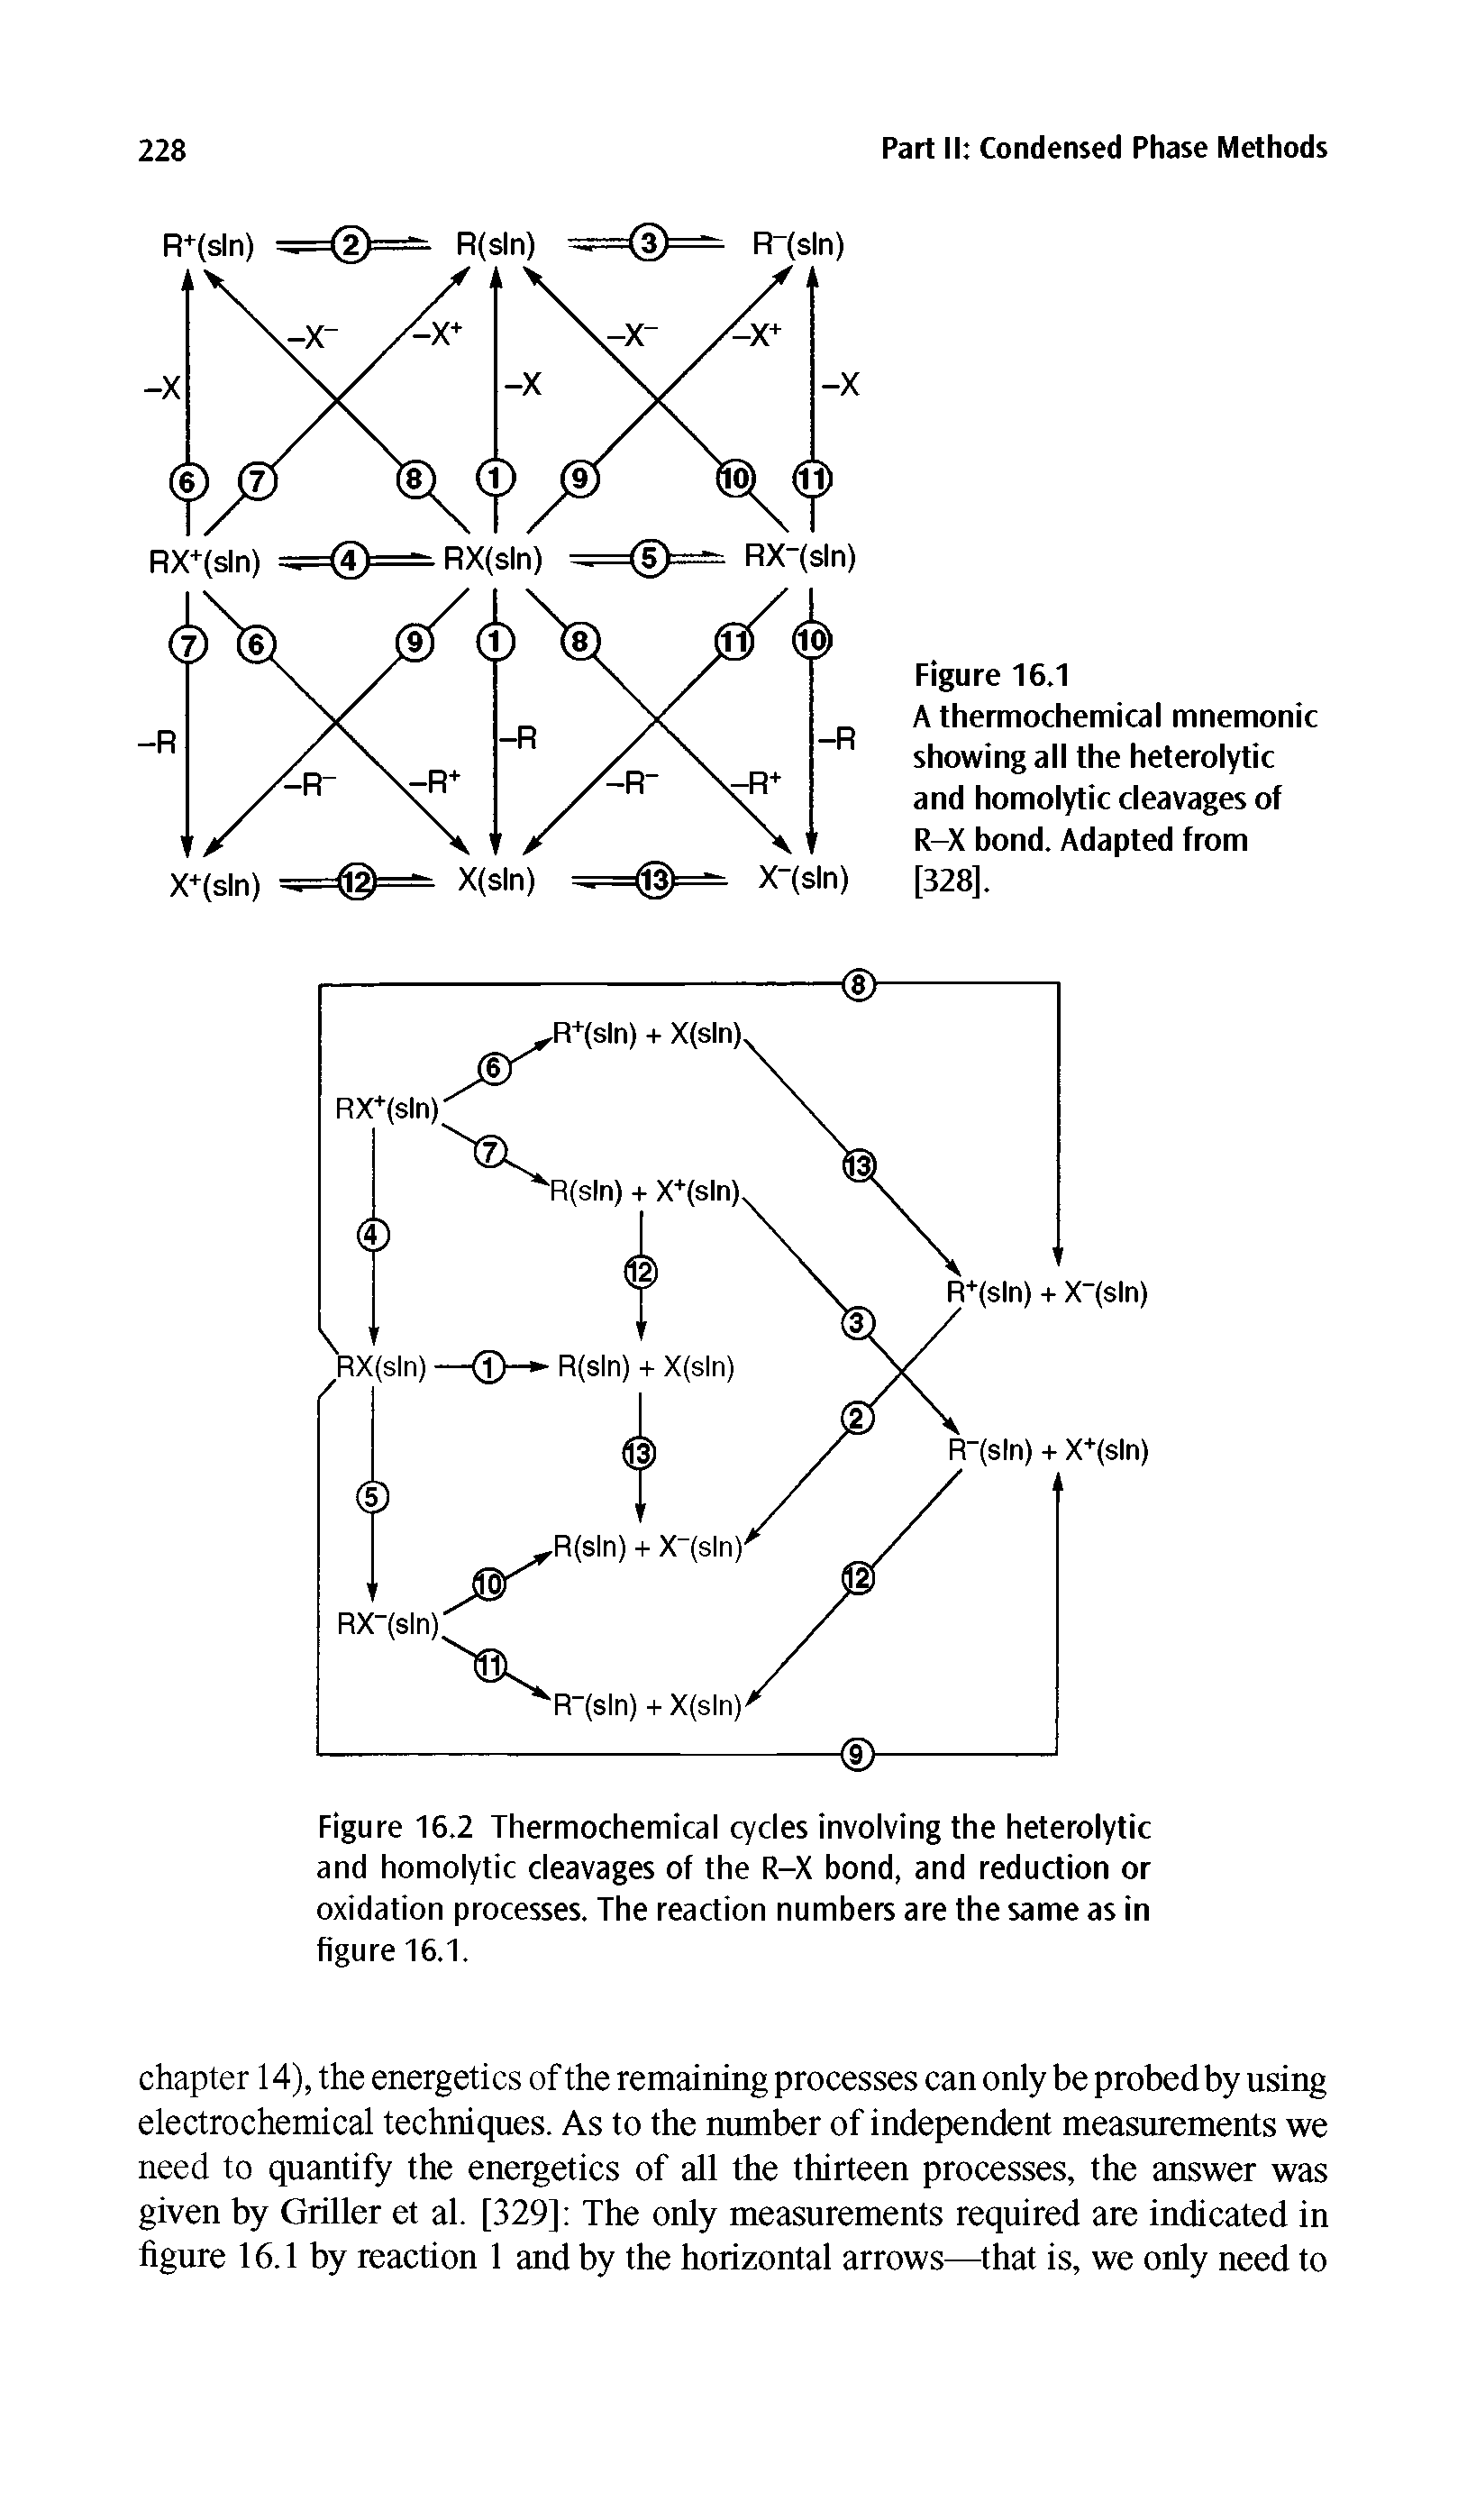 Figure 16.2 Thermochemical cycles involving the heterolytic and homolytic cleavages of the R-X bond, and reduction or oxidation processes. The reaction numbers are the same as in figure 16.1.